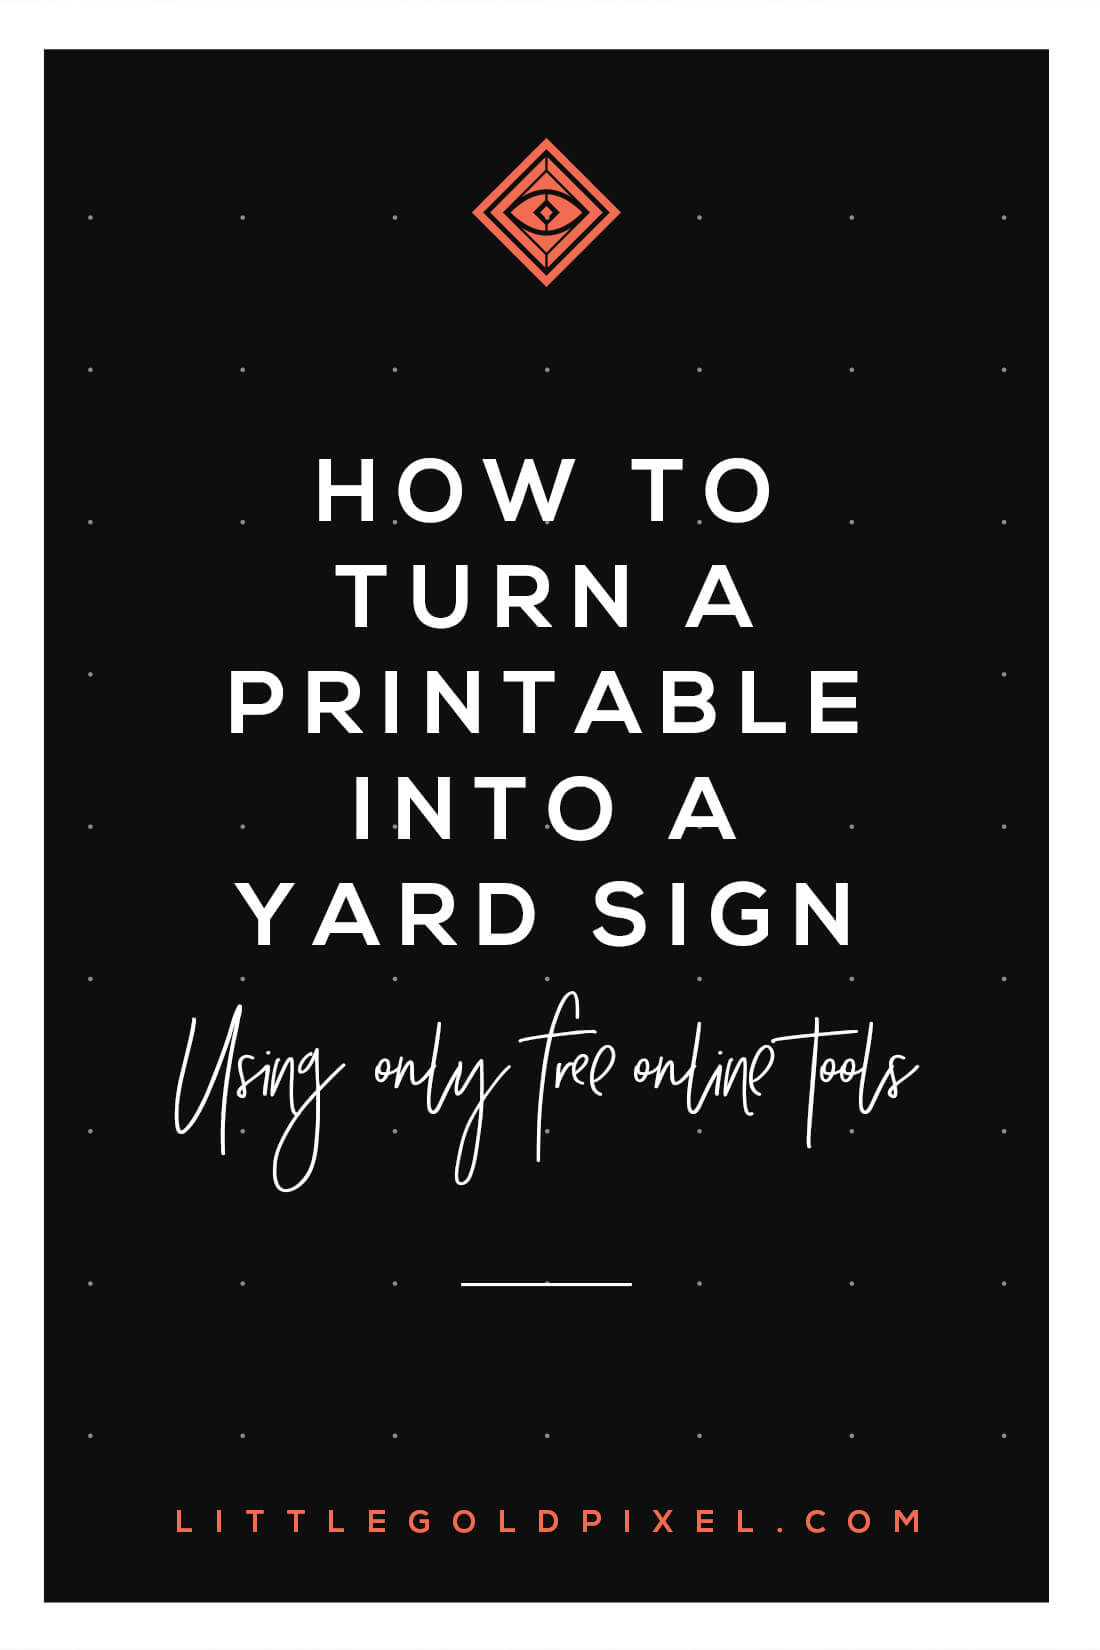 How to Turn a Printable into a Yard Sign • Little Gold Pixel